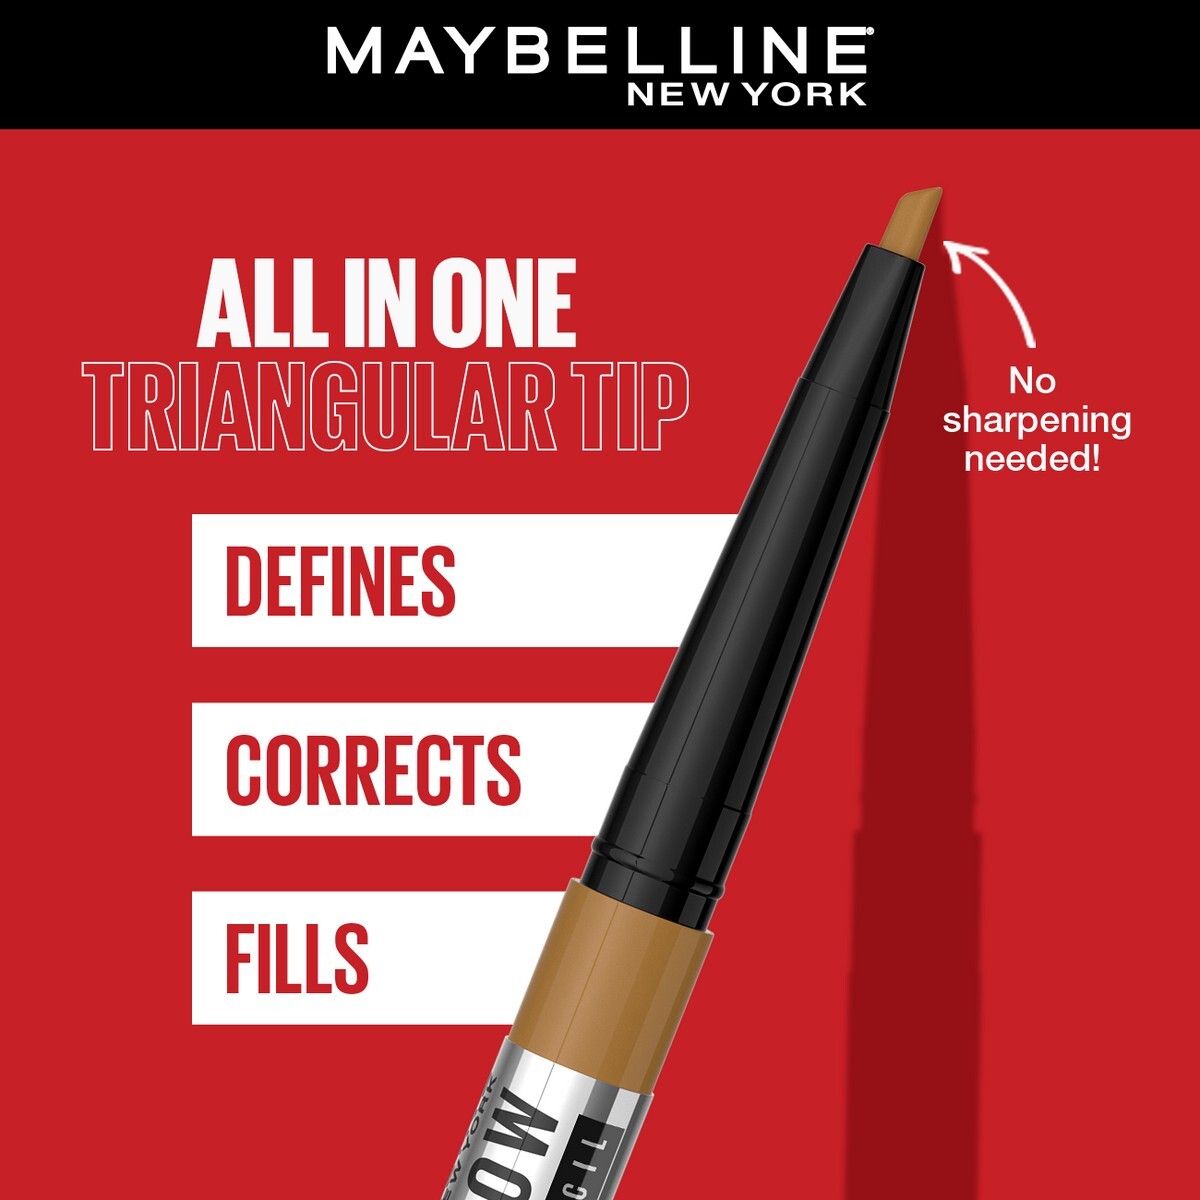 Maybelline Tattoo Brow 36 Hr Brow Pencil, Light Brown, 0.25gm , Waterproof Eyebrow Pencil with Precision Tip